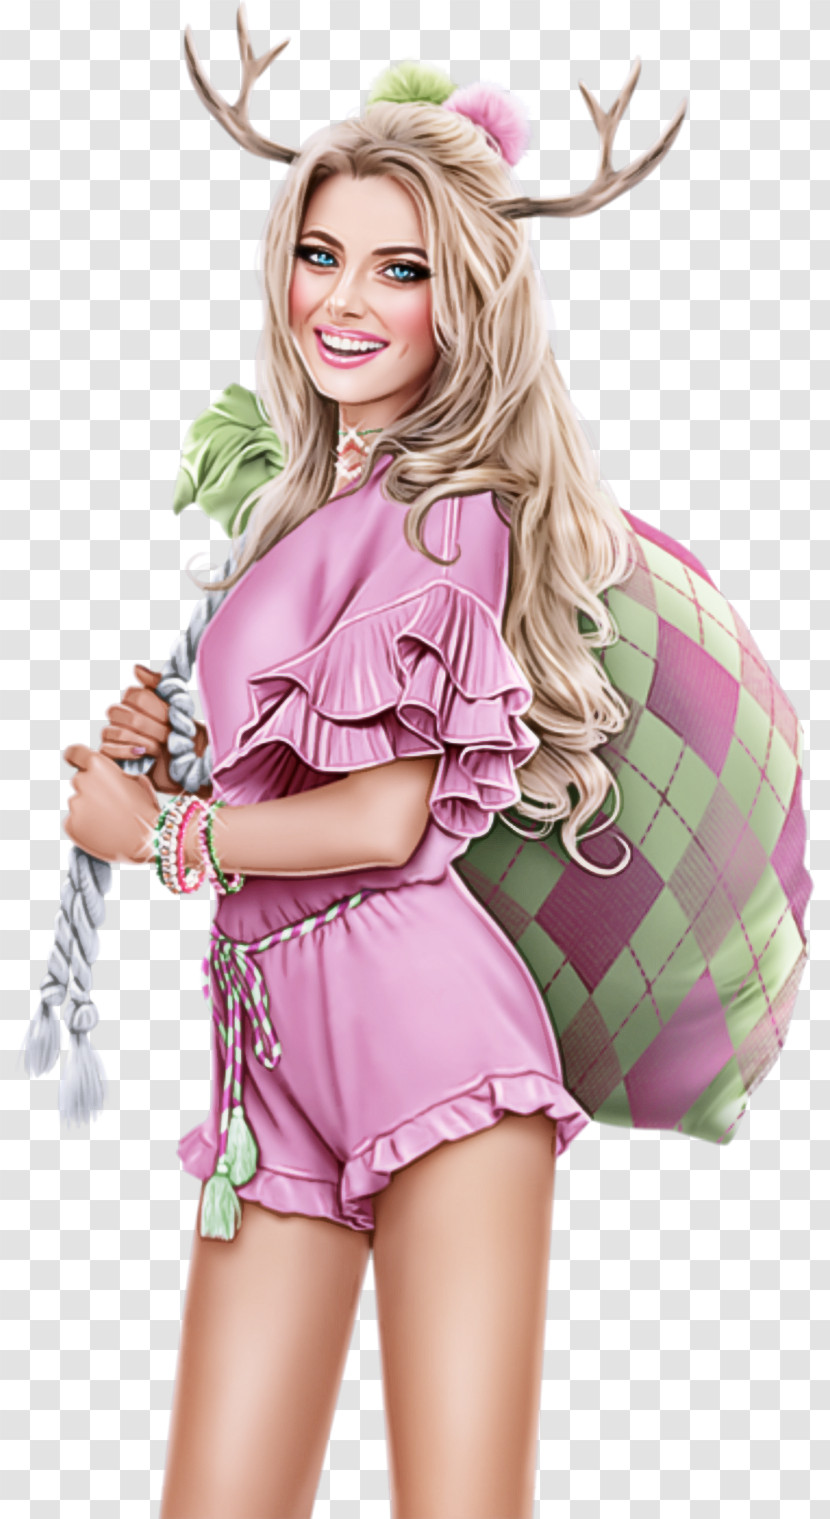 Clothing Pink Blond Shorts Costume Transparent PNG